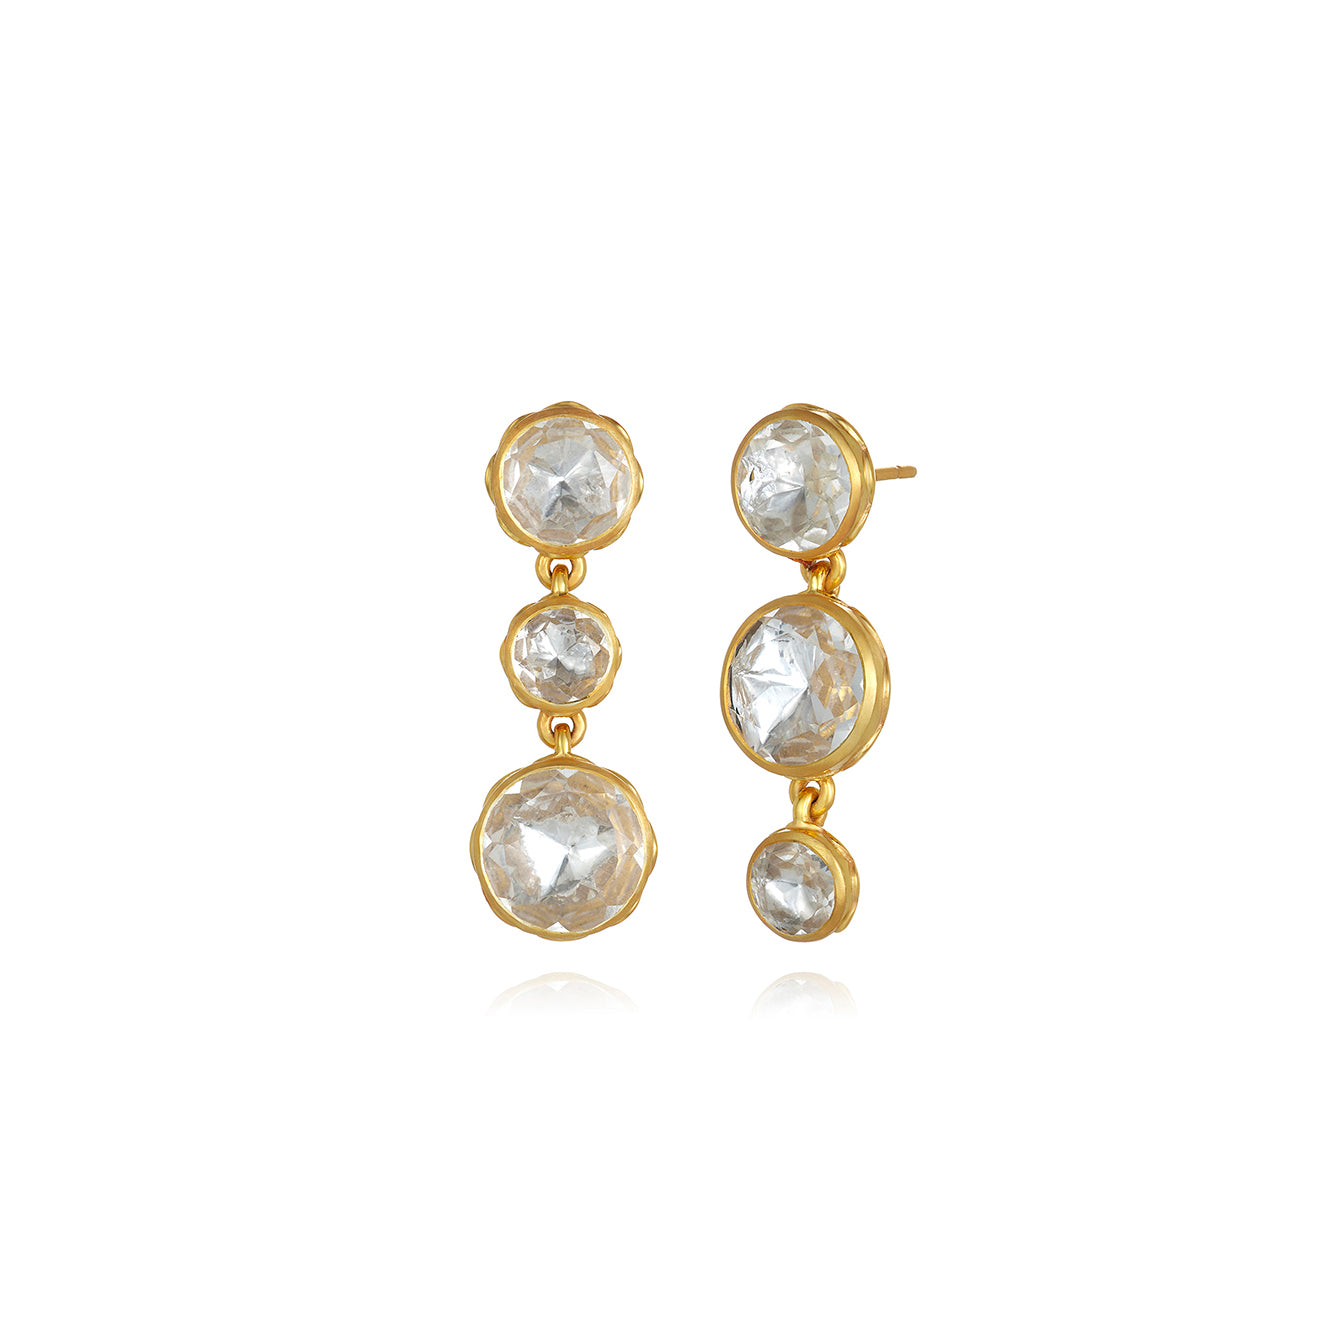 Catherine Round 3-Drop Earrings (Black Rhodium or Yellow Gold Wash)